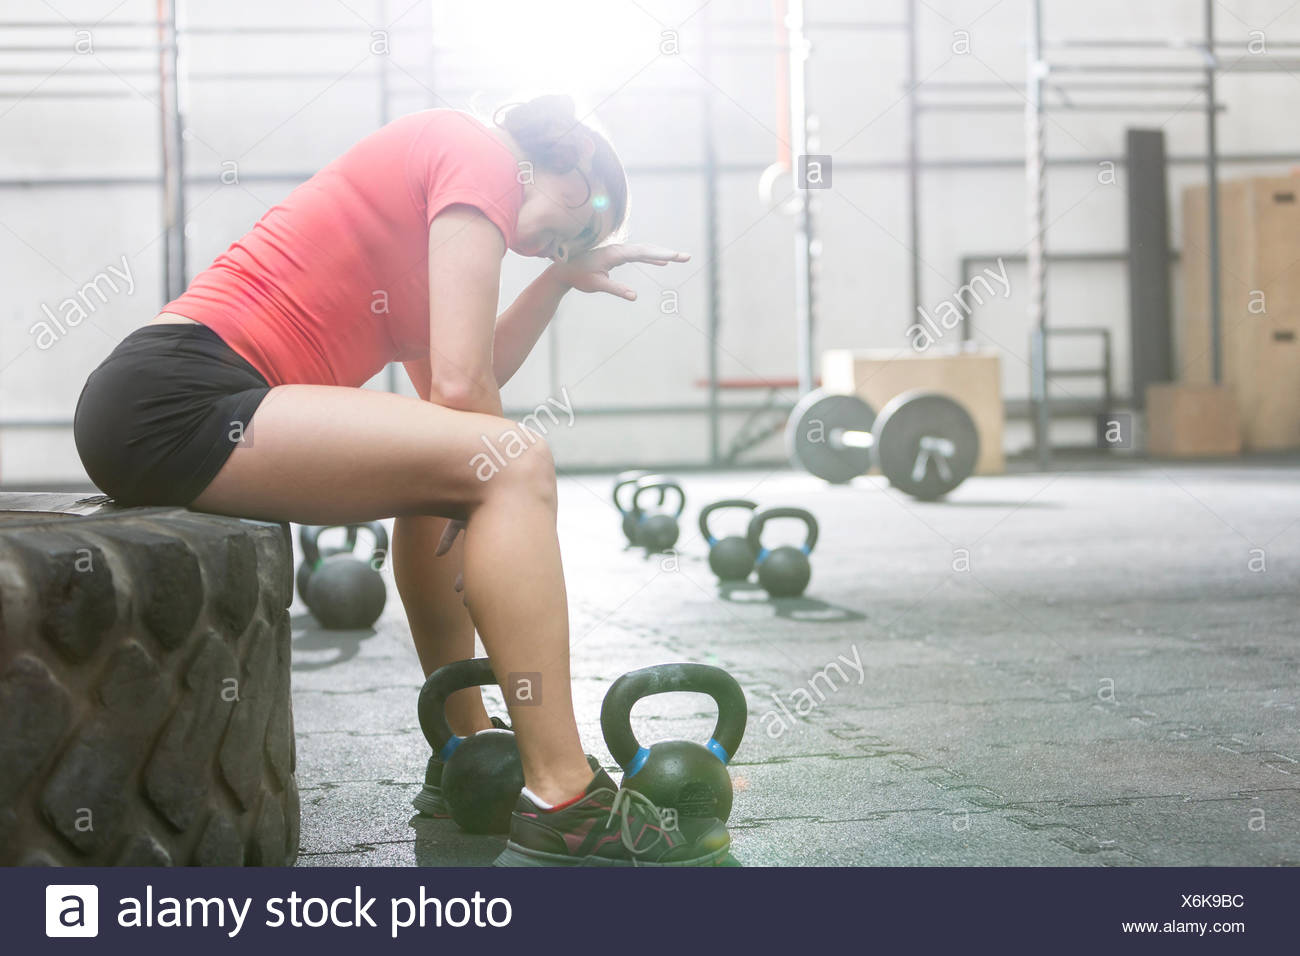 Female Weightlifter High Resolution Stock Photography and Images - Alamy